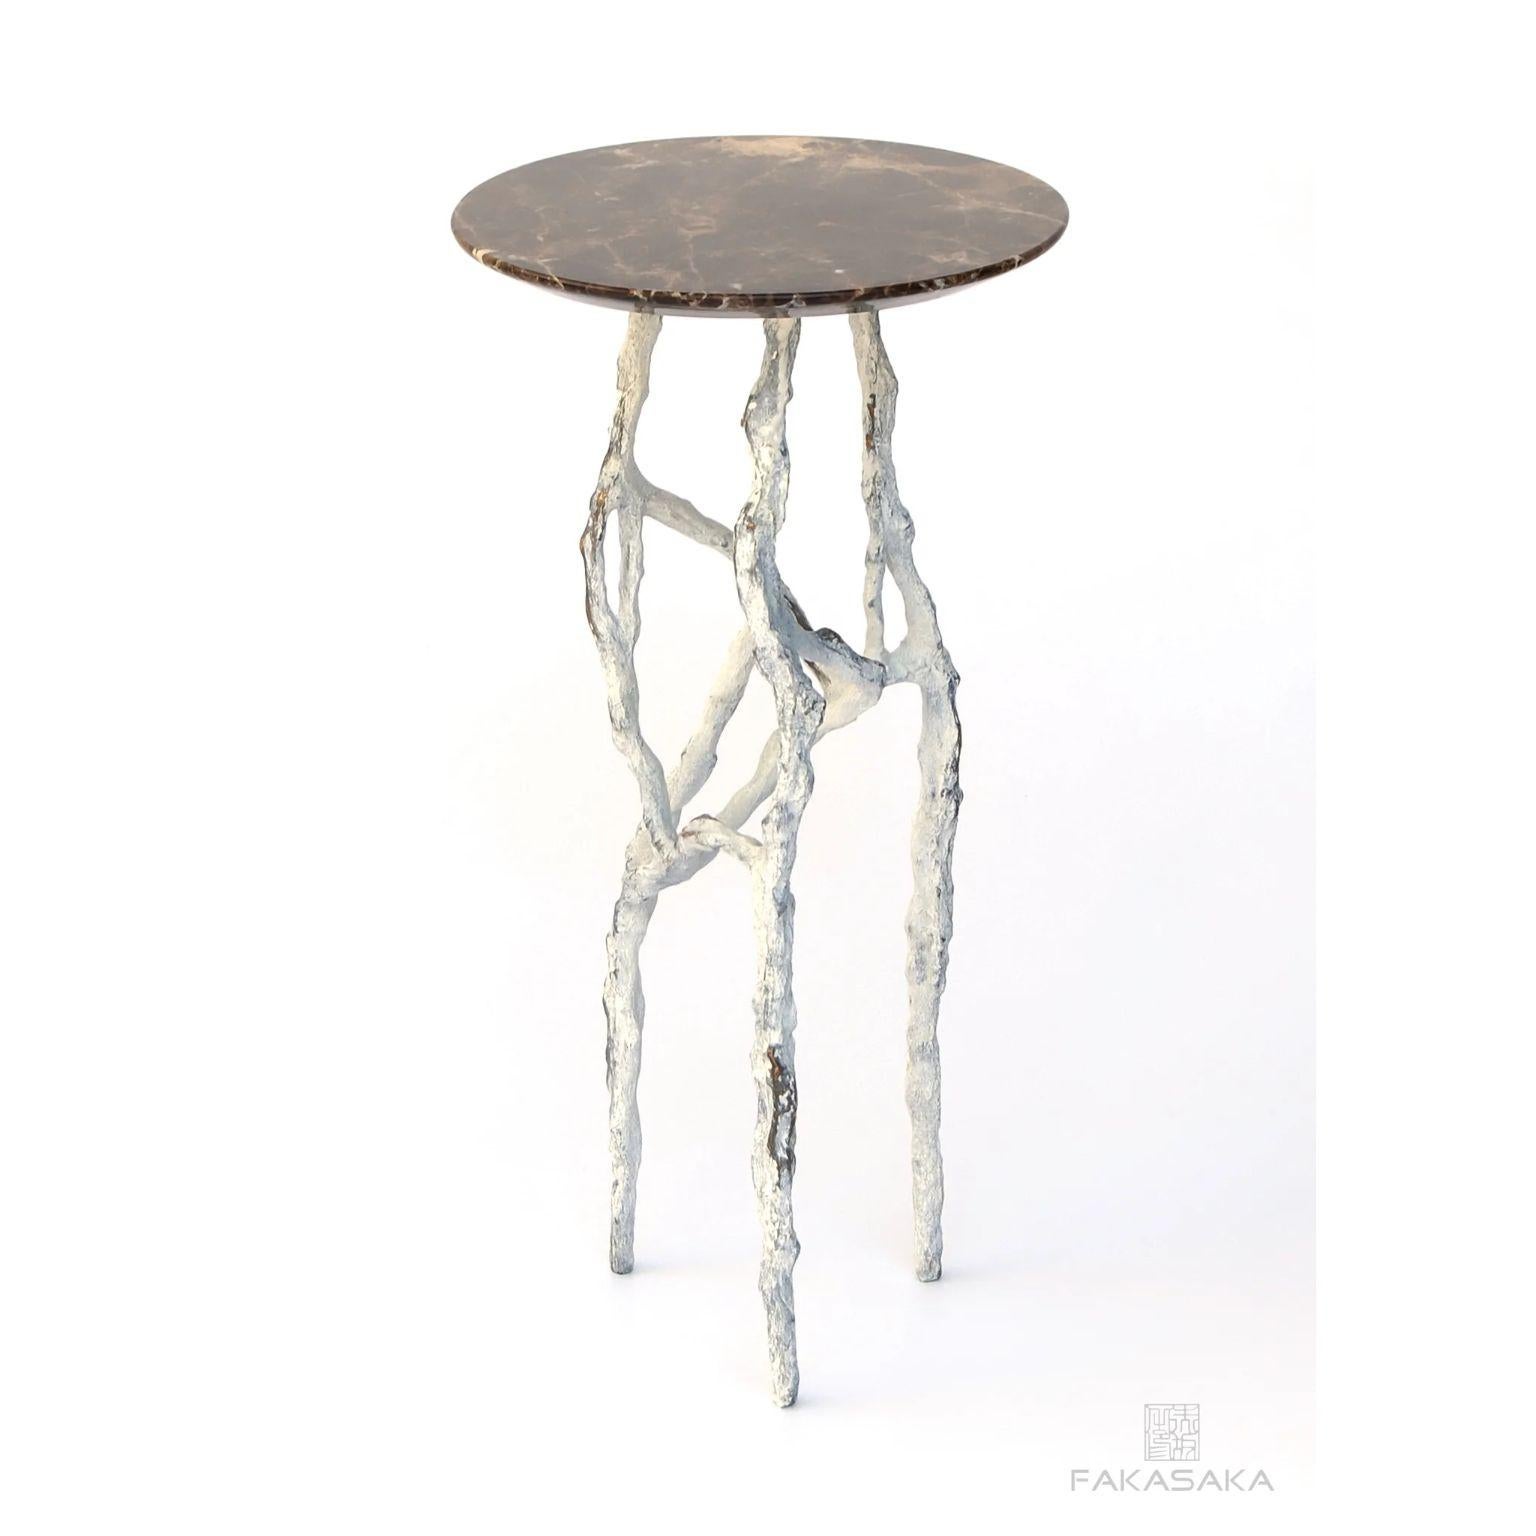 Modern Alexia 3 Drink Table with Marrom Imperial Marble Top by Fakasaka Design For Sale